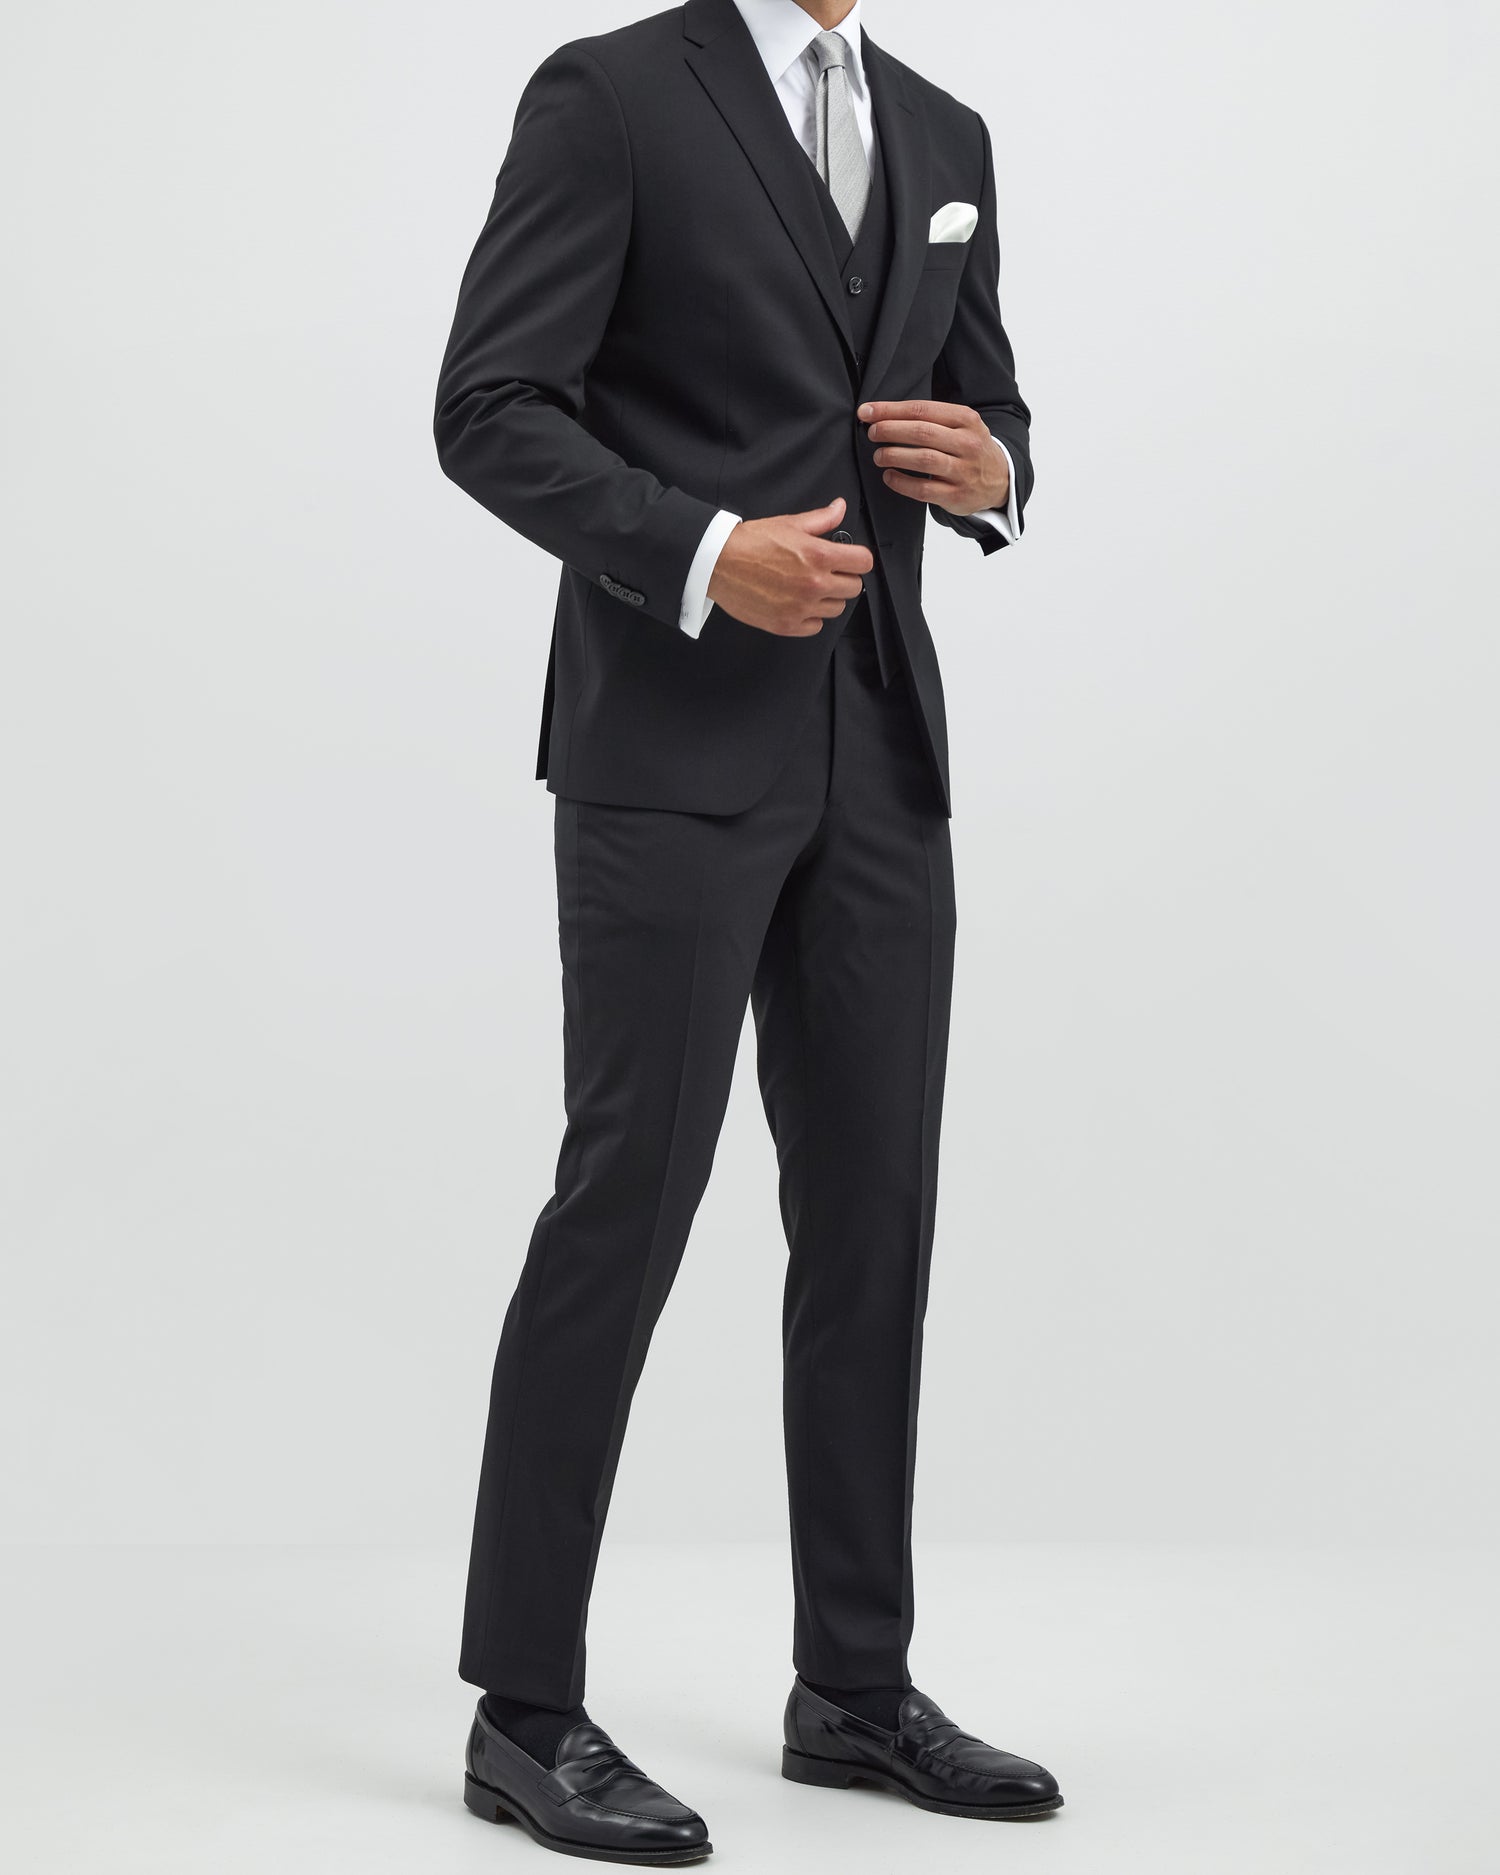 Modern fit Trousers for Tail Coat and Tuxedo – Turo